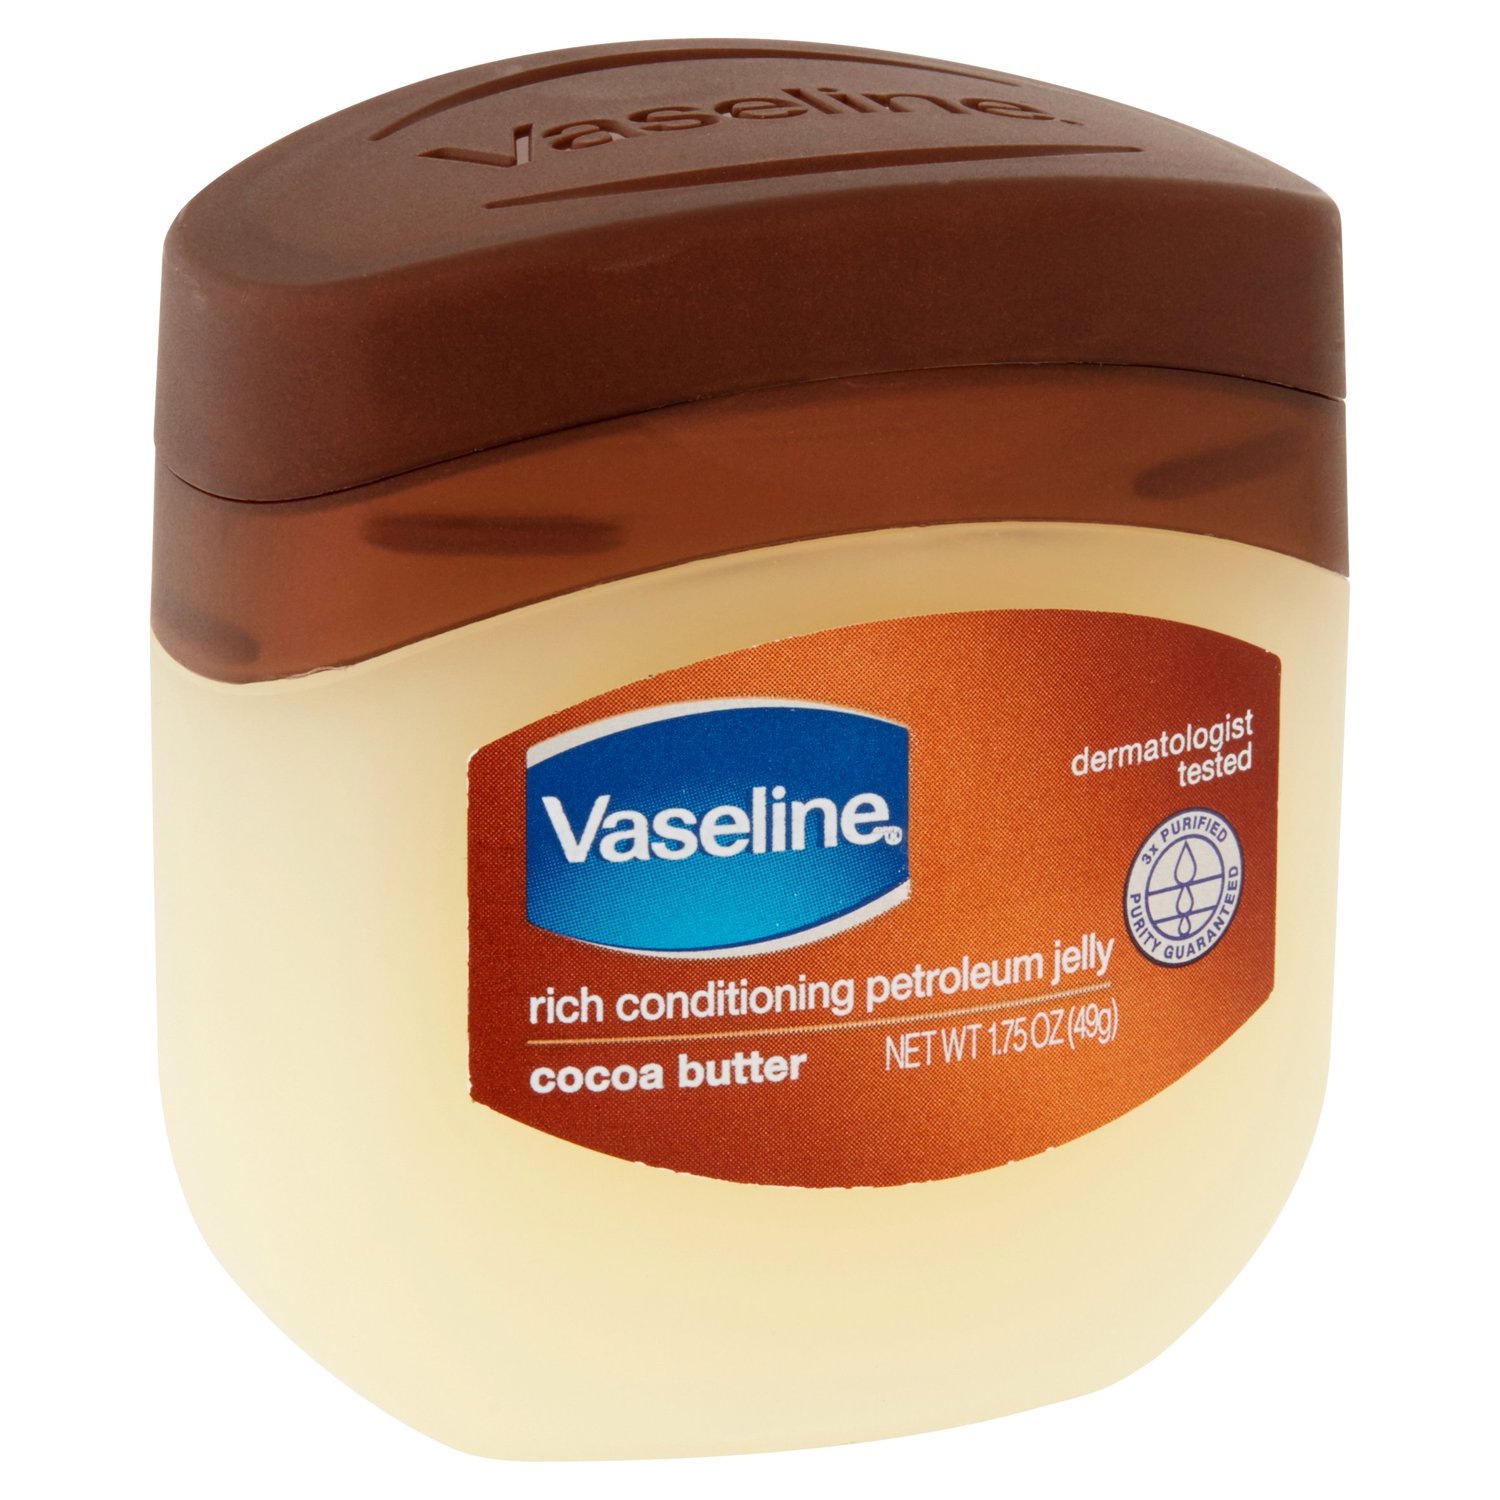 Vaseline Rich Conditioning Cocoa Butter Healing Petroleum Jelly for Dry Skin, 1.75 oz - image 3 of 6